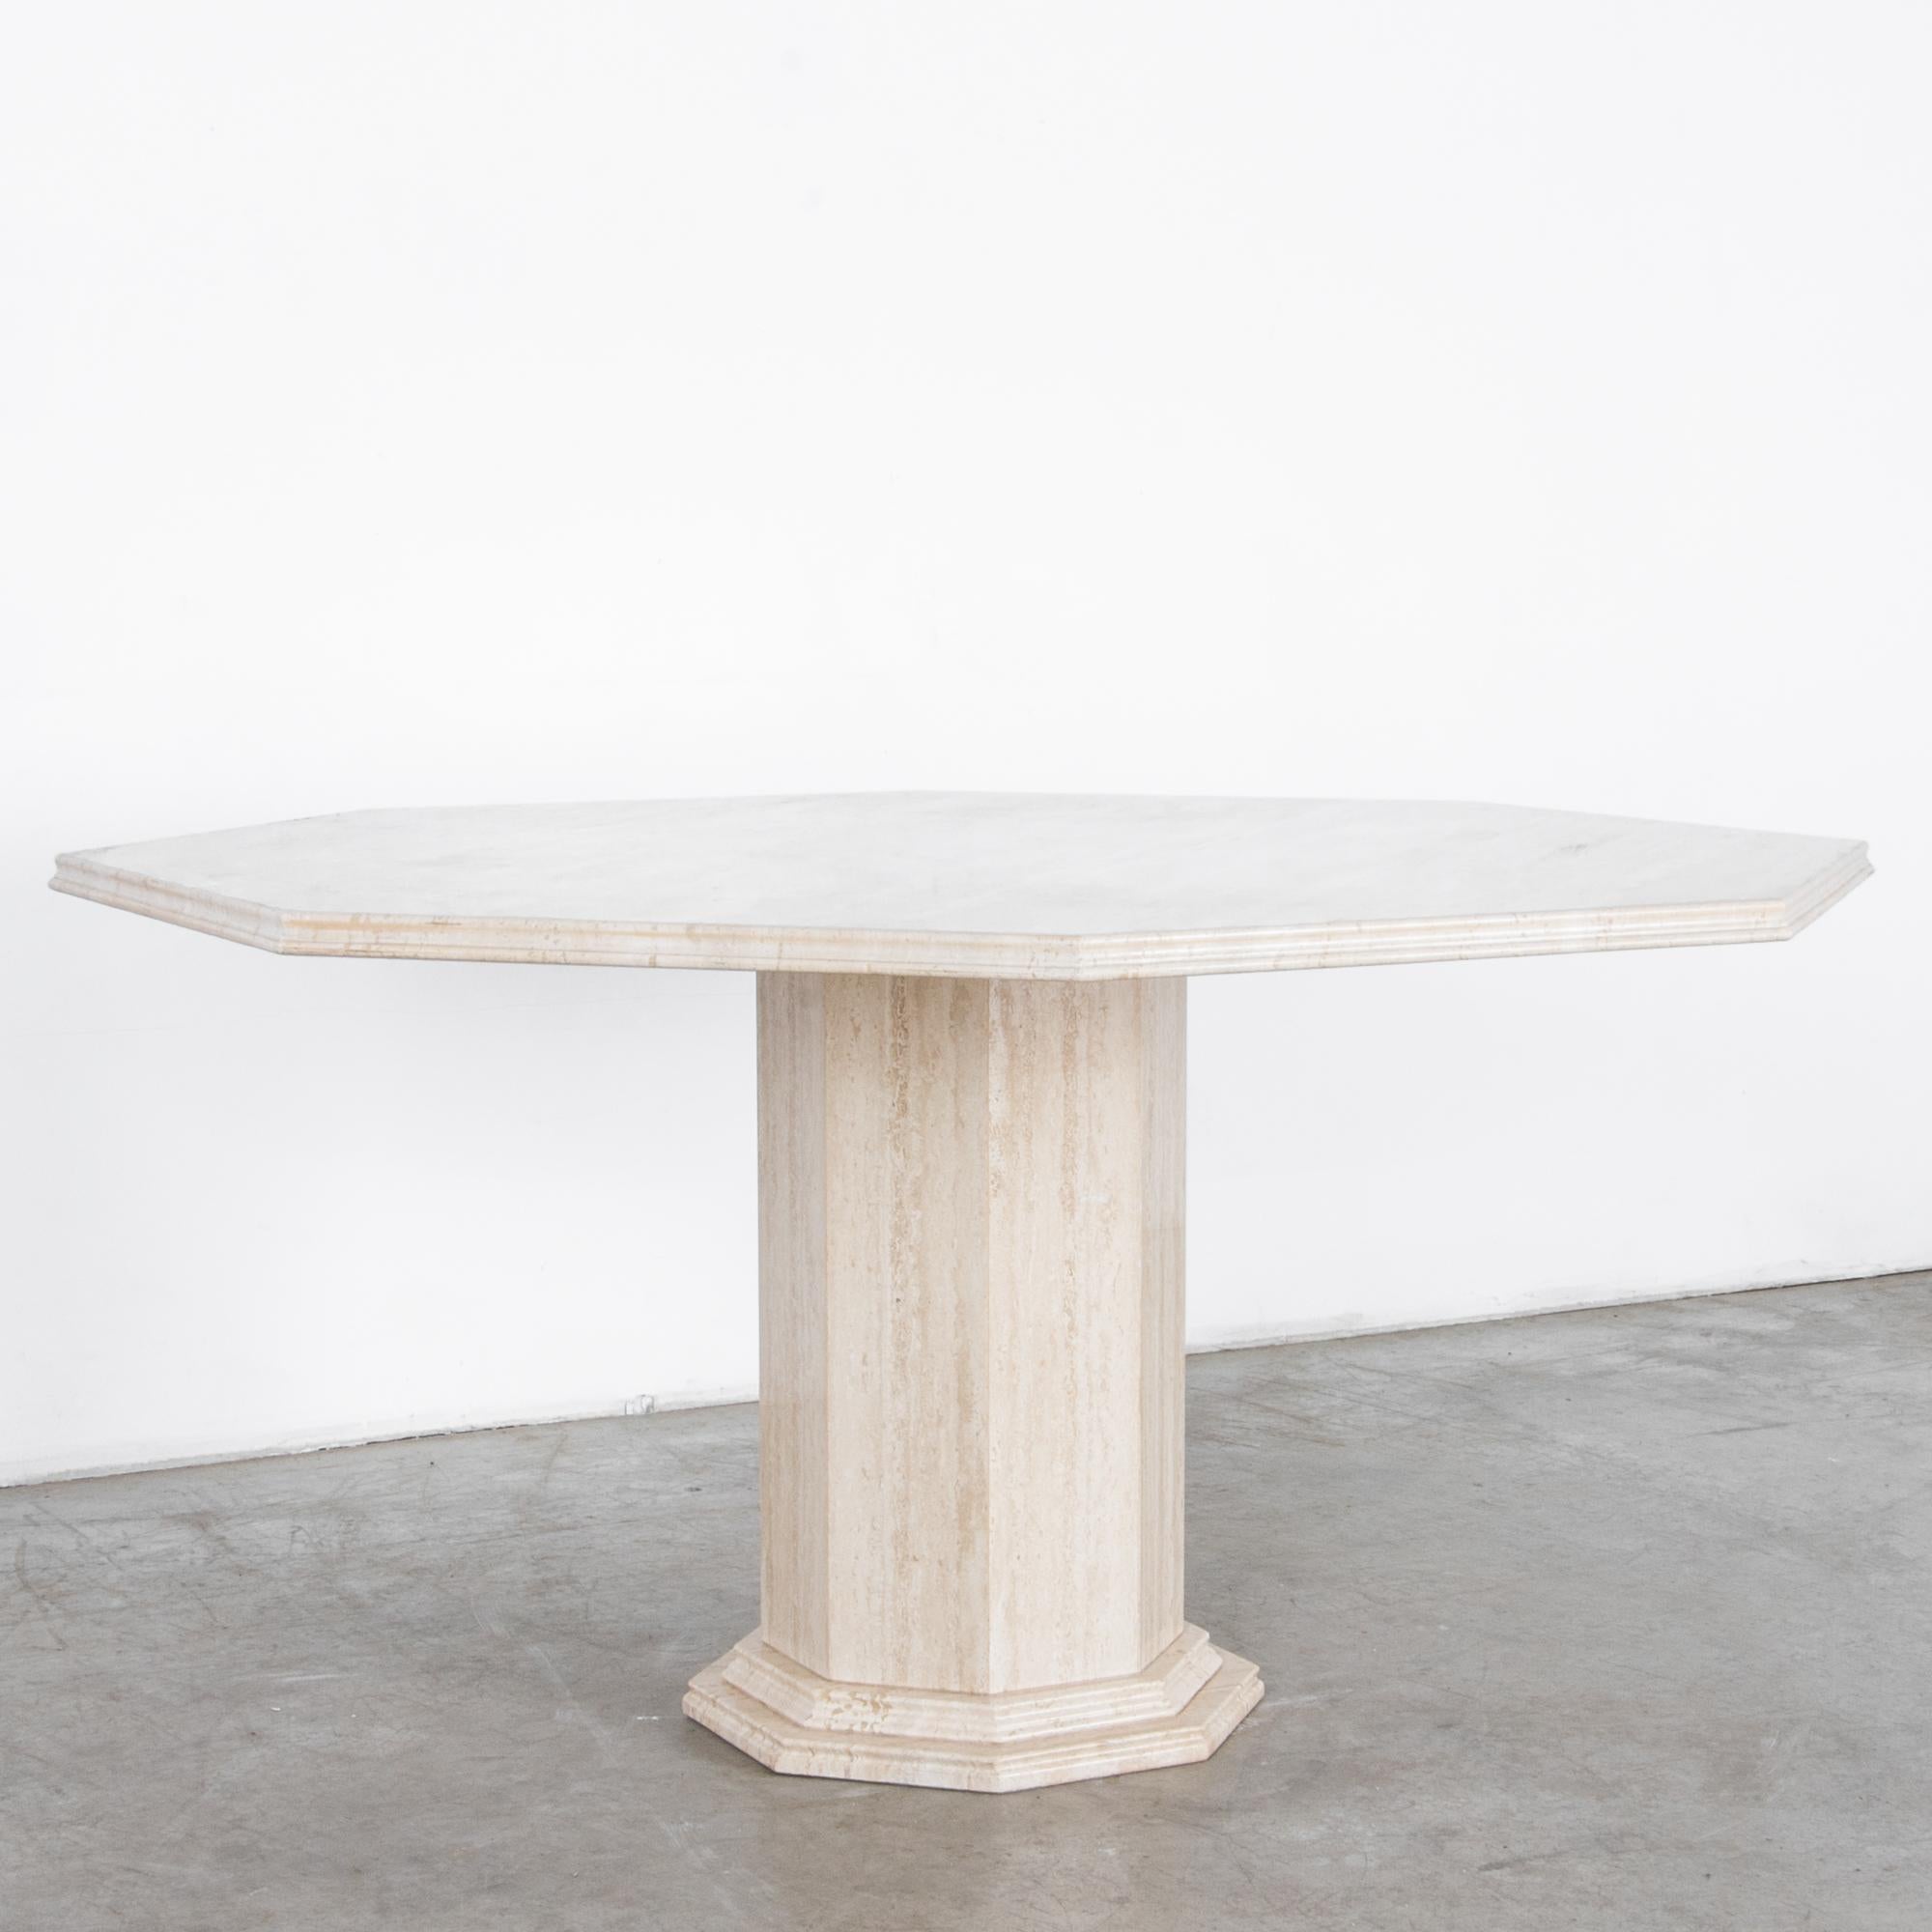 A cantilevered octagonal slab of light travertine rests on a faceted round pedestal, in this stylish and simple dining table. The tabletop is carved with an ogee edge profile, and framed below by a profiled column base, in a neoclassical inflected